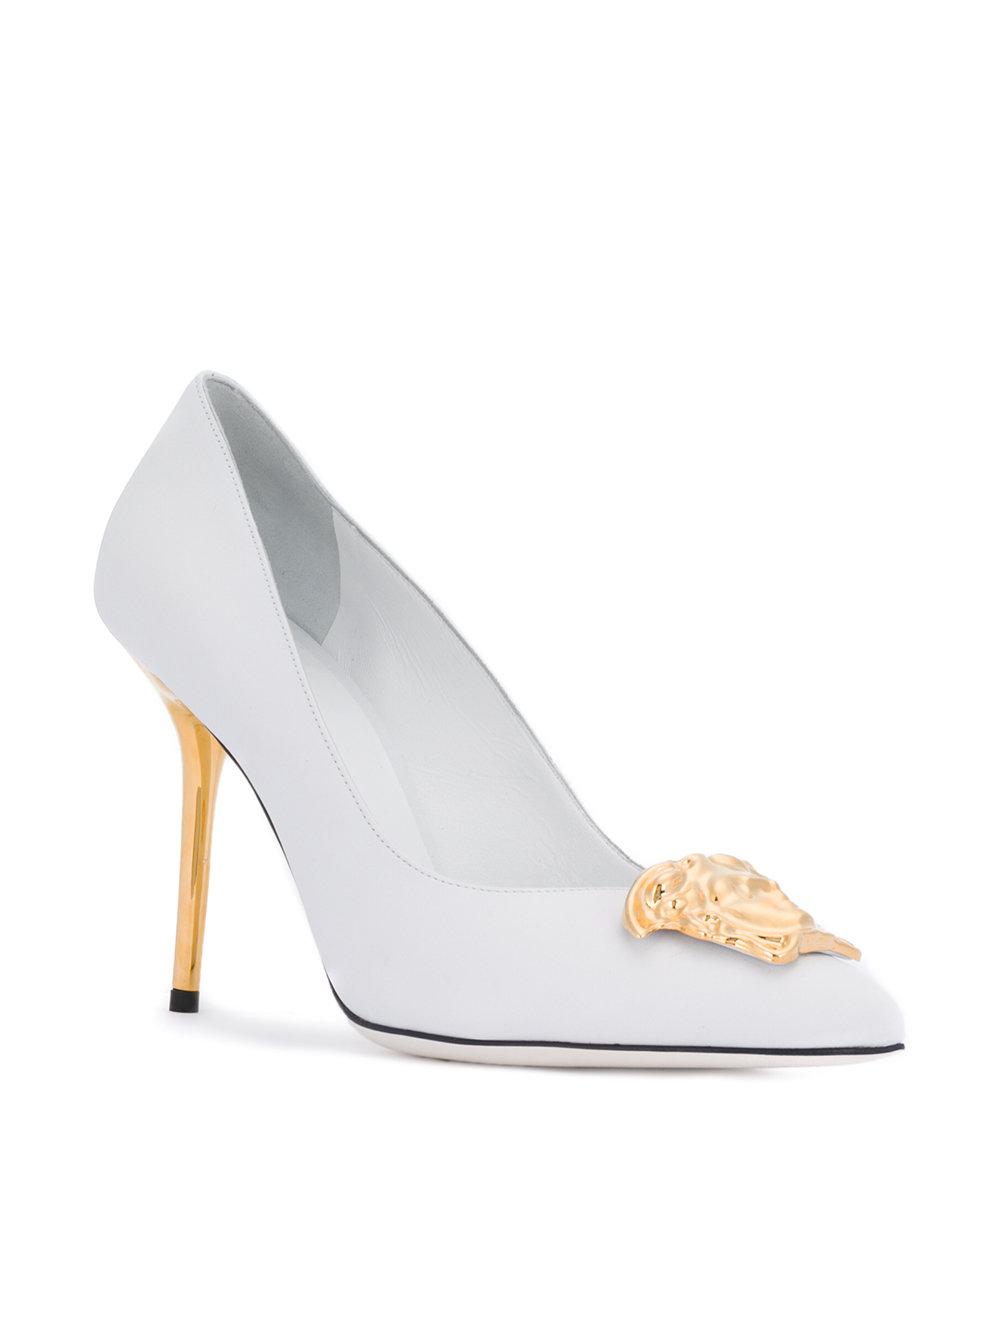 Versace Medusa Palazzo Pumps in White | Lyst